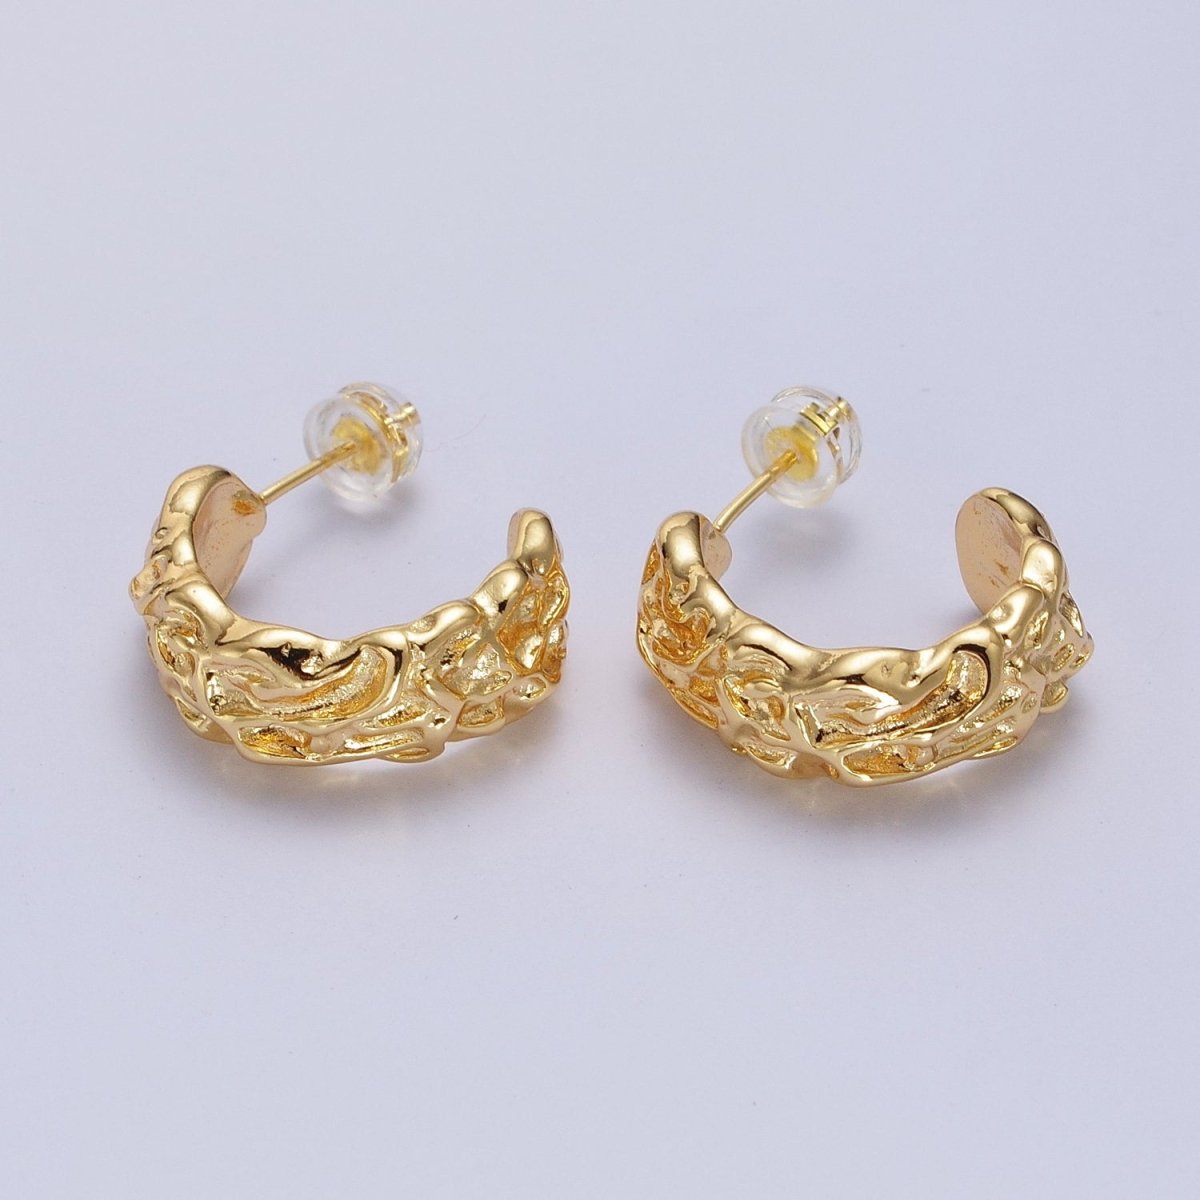 Geometric Abstract Foil C-Shaped Stud Hoops in Gold & Silver | AB016 AB017 - DLUXCA